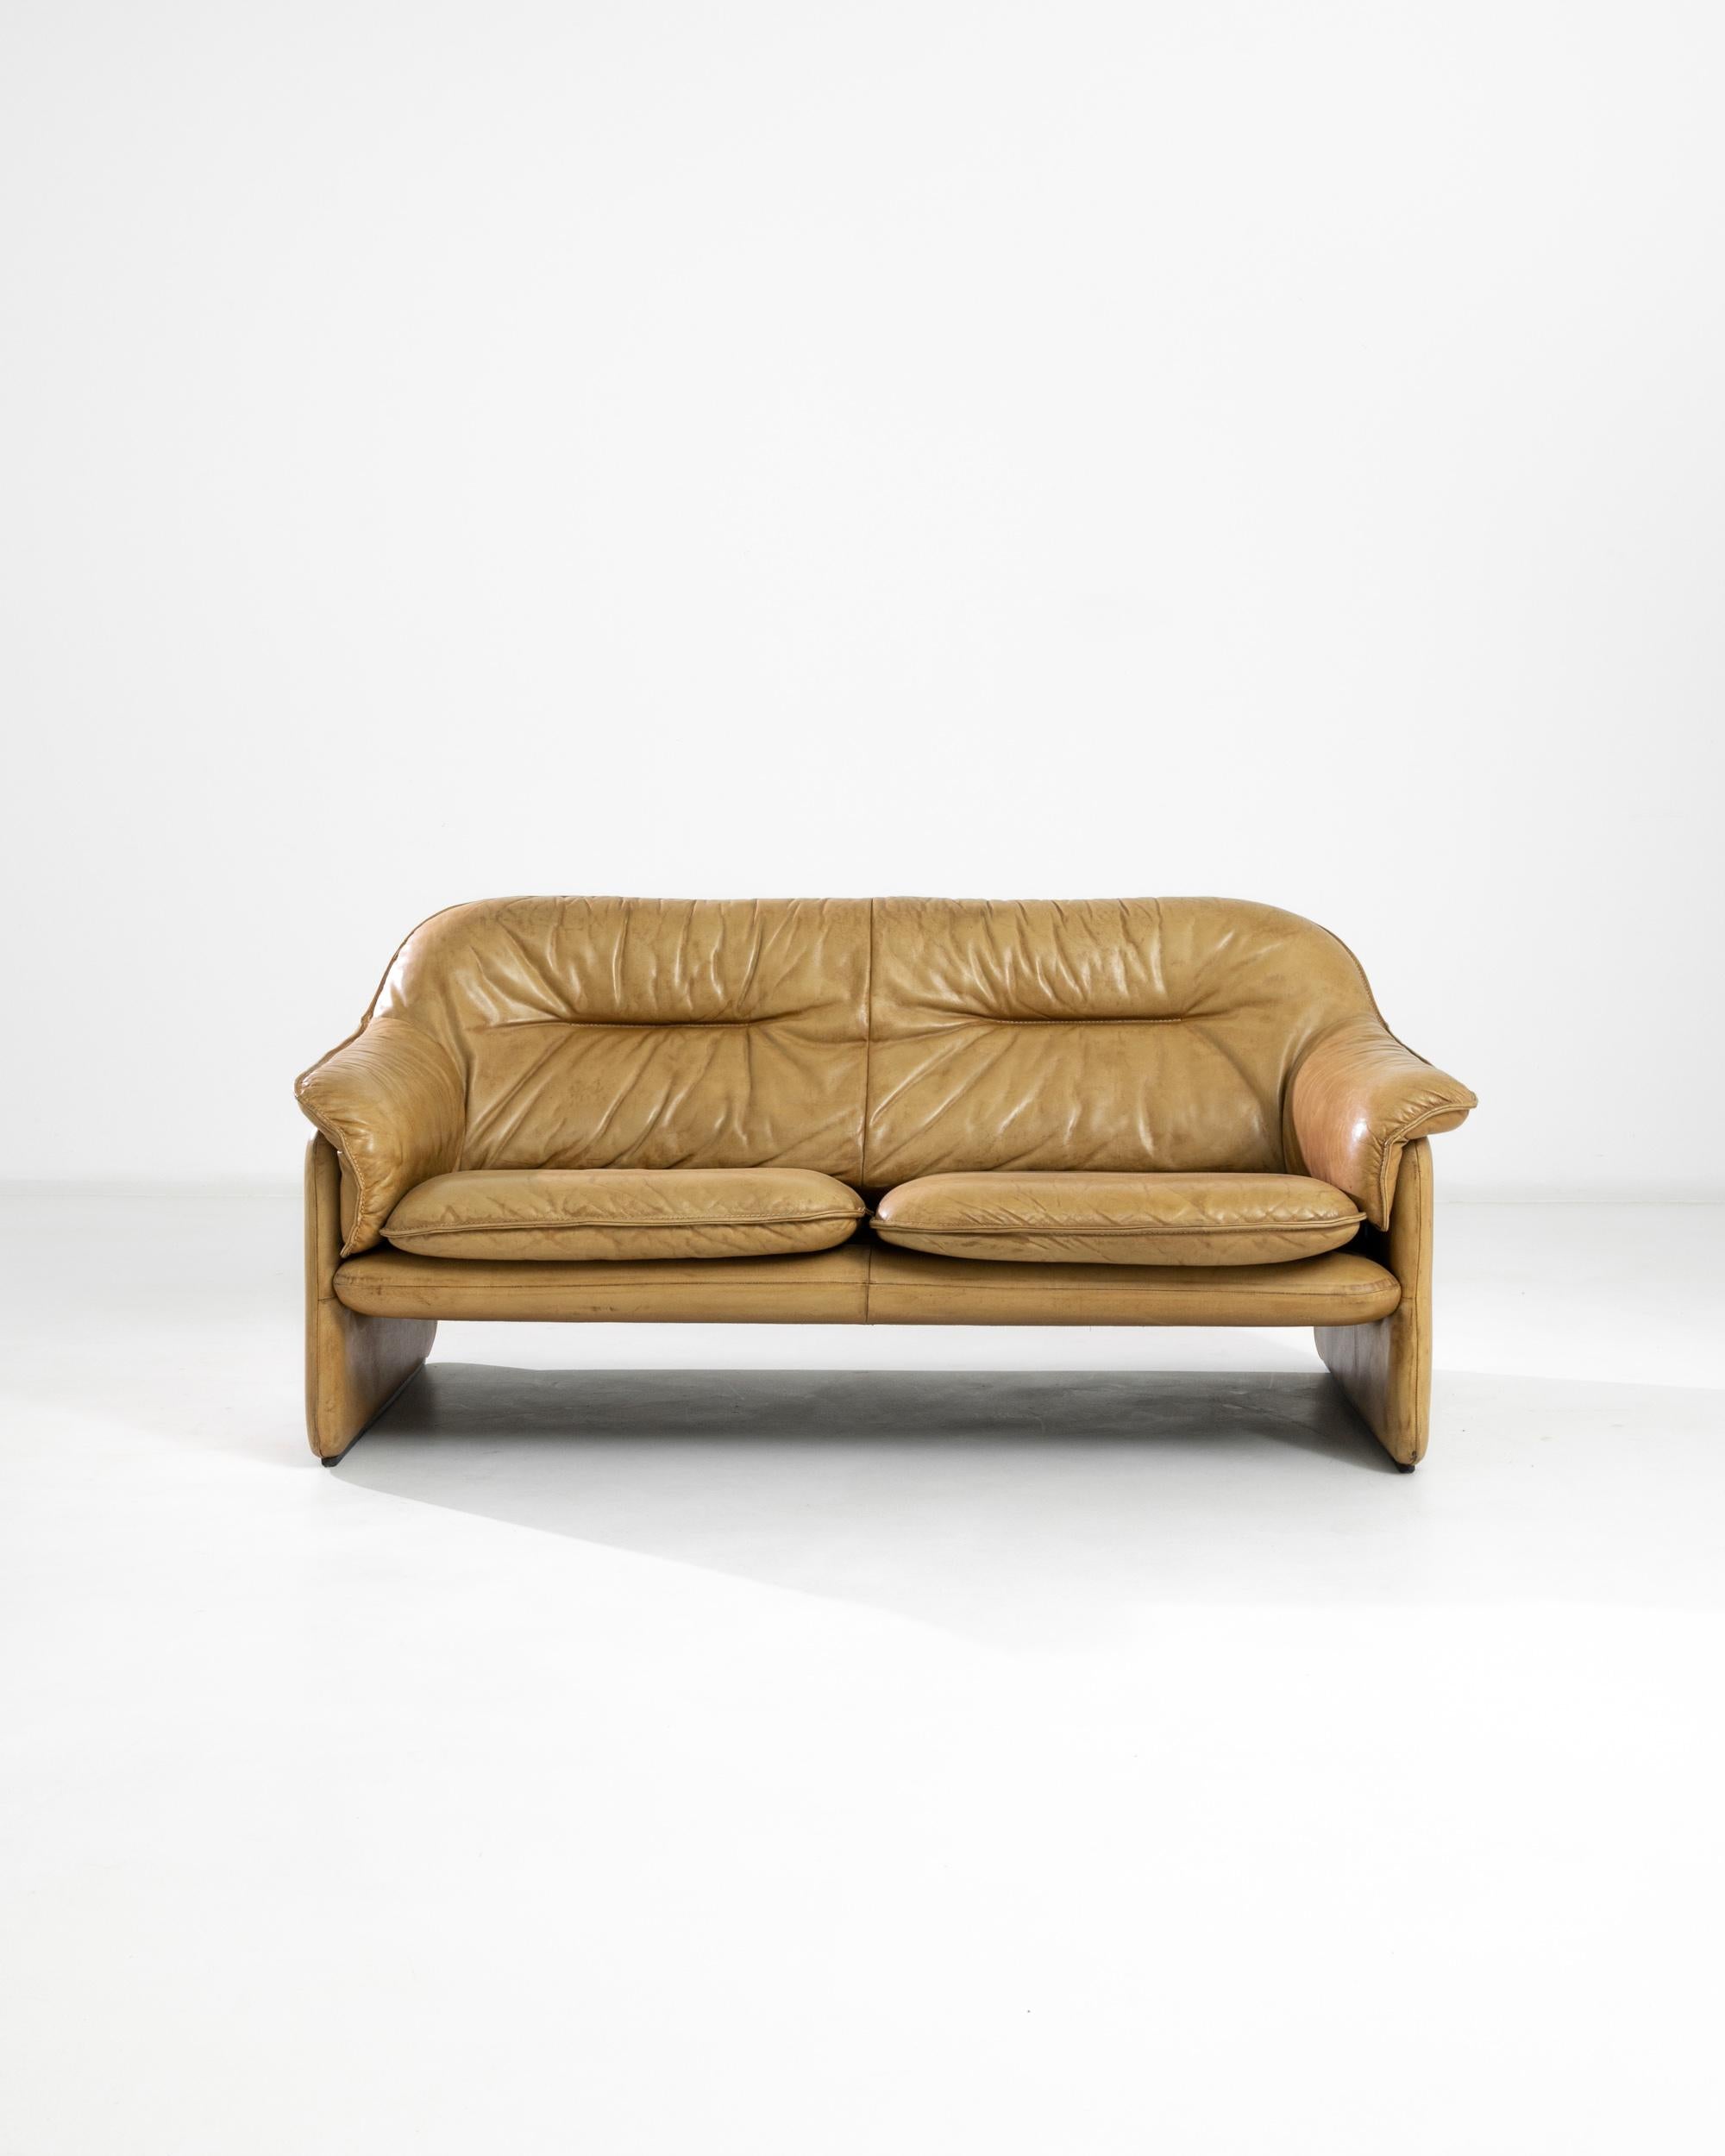 Late 20th Century Vintage Swiss Leather Loveseat by De Sede